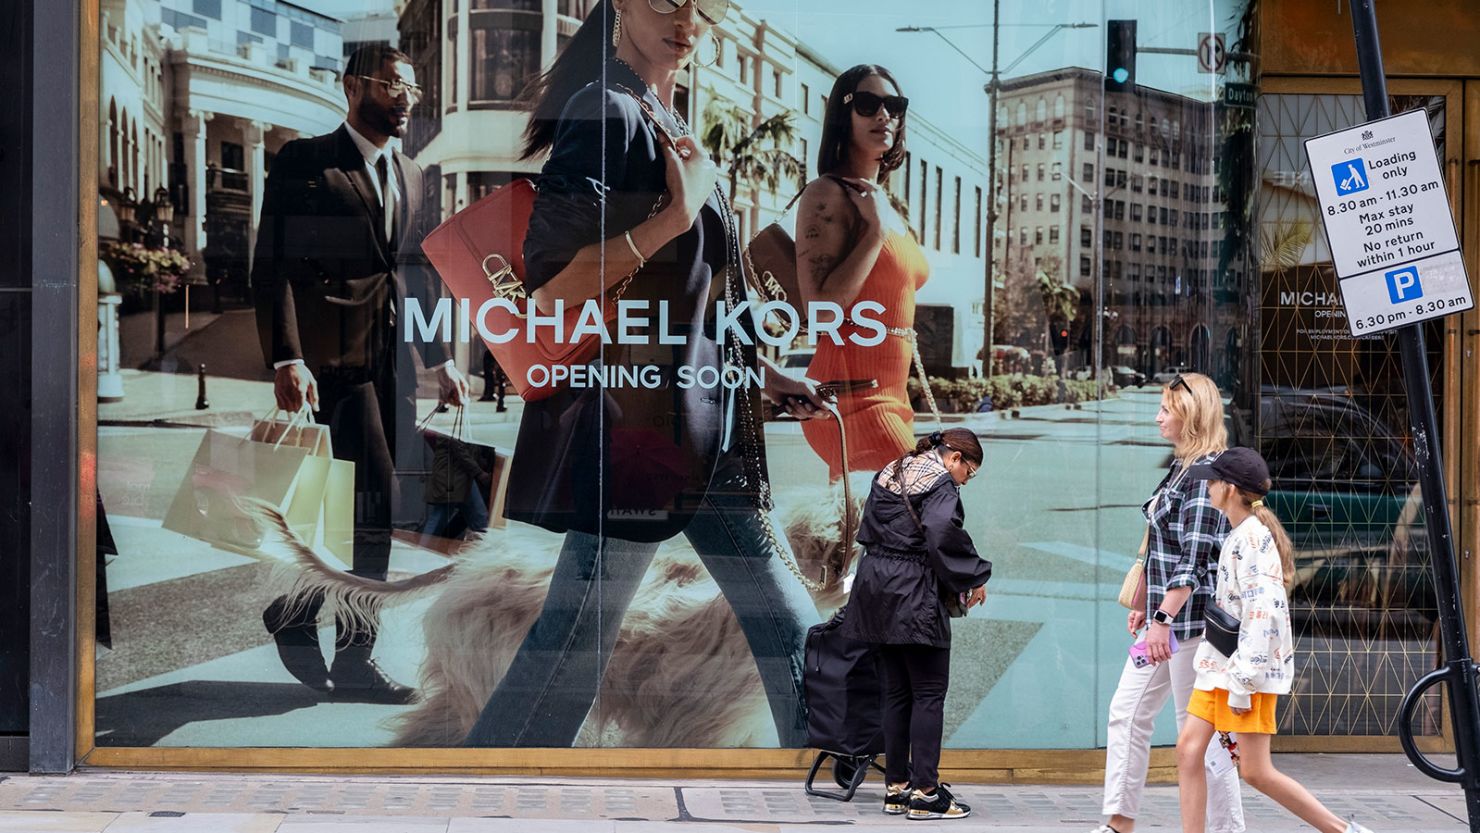 Retail space under refurbishment which will be opening soon as a new Michael Kors store on Bond Street on 14th August 2023 in London, United Kingdom.